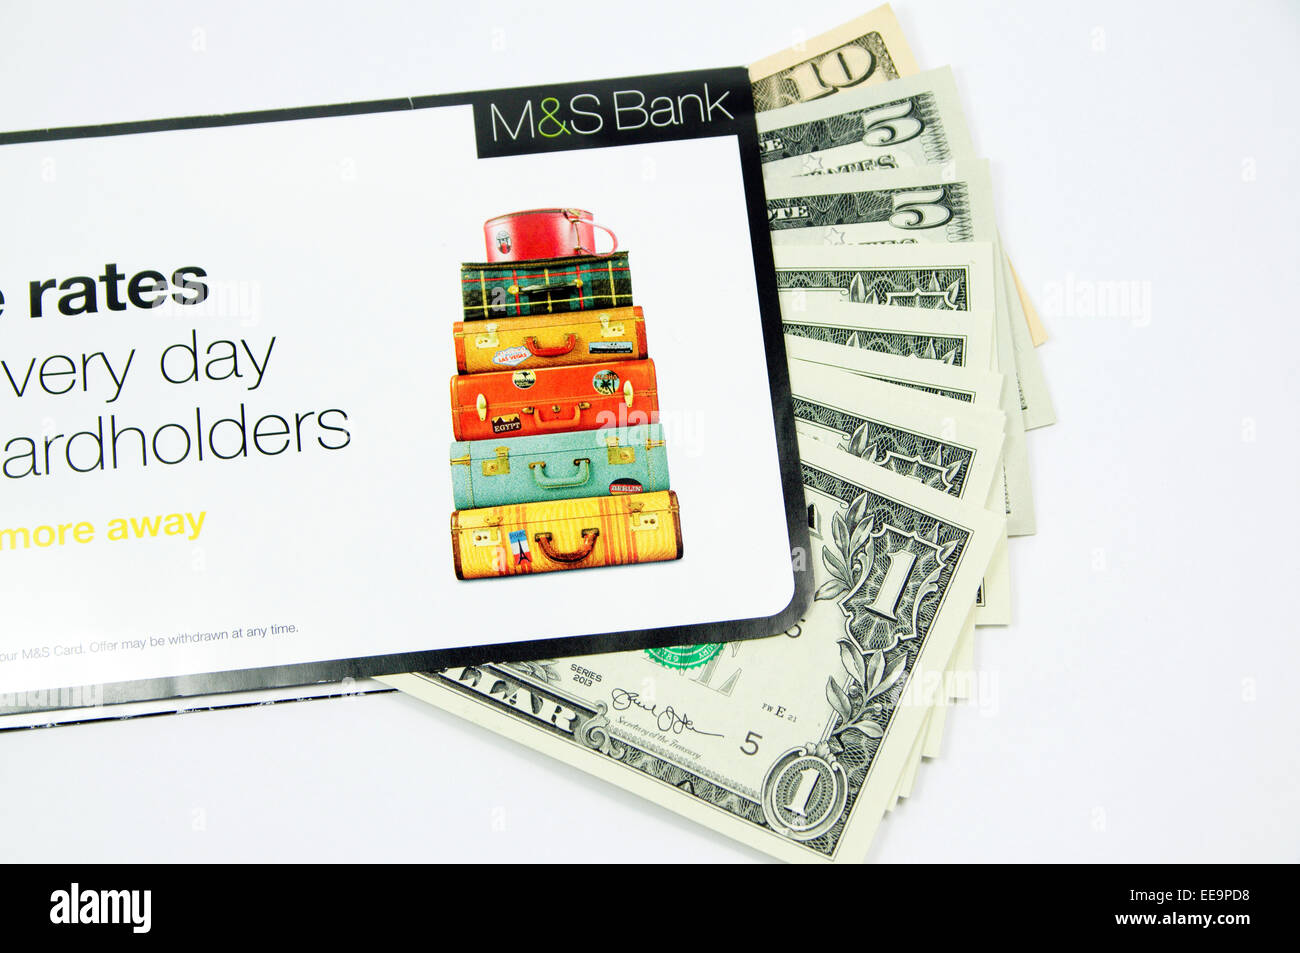 M&S Bank envelope and US Dollars. Stock Photo